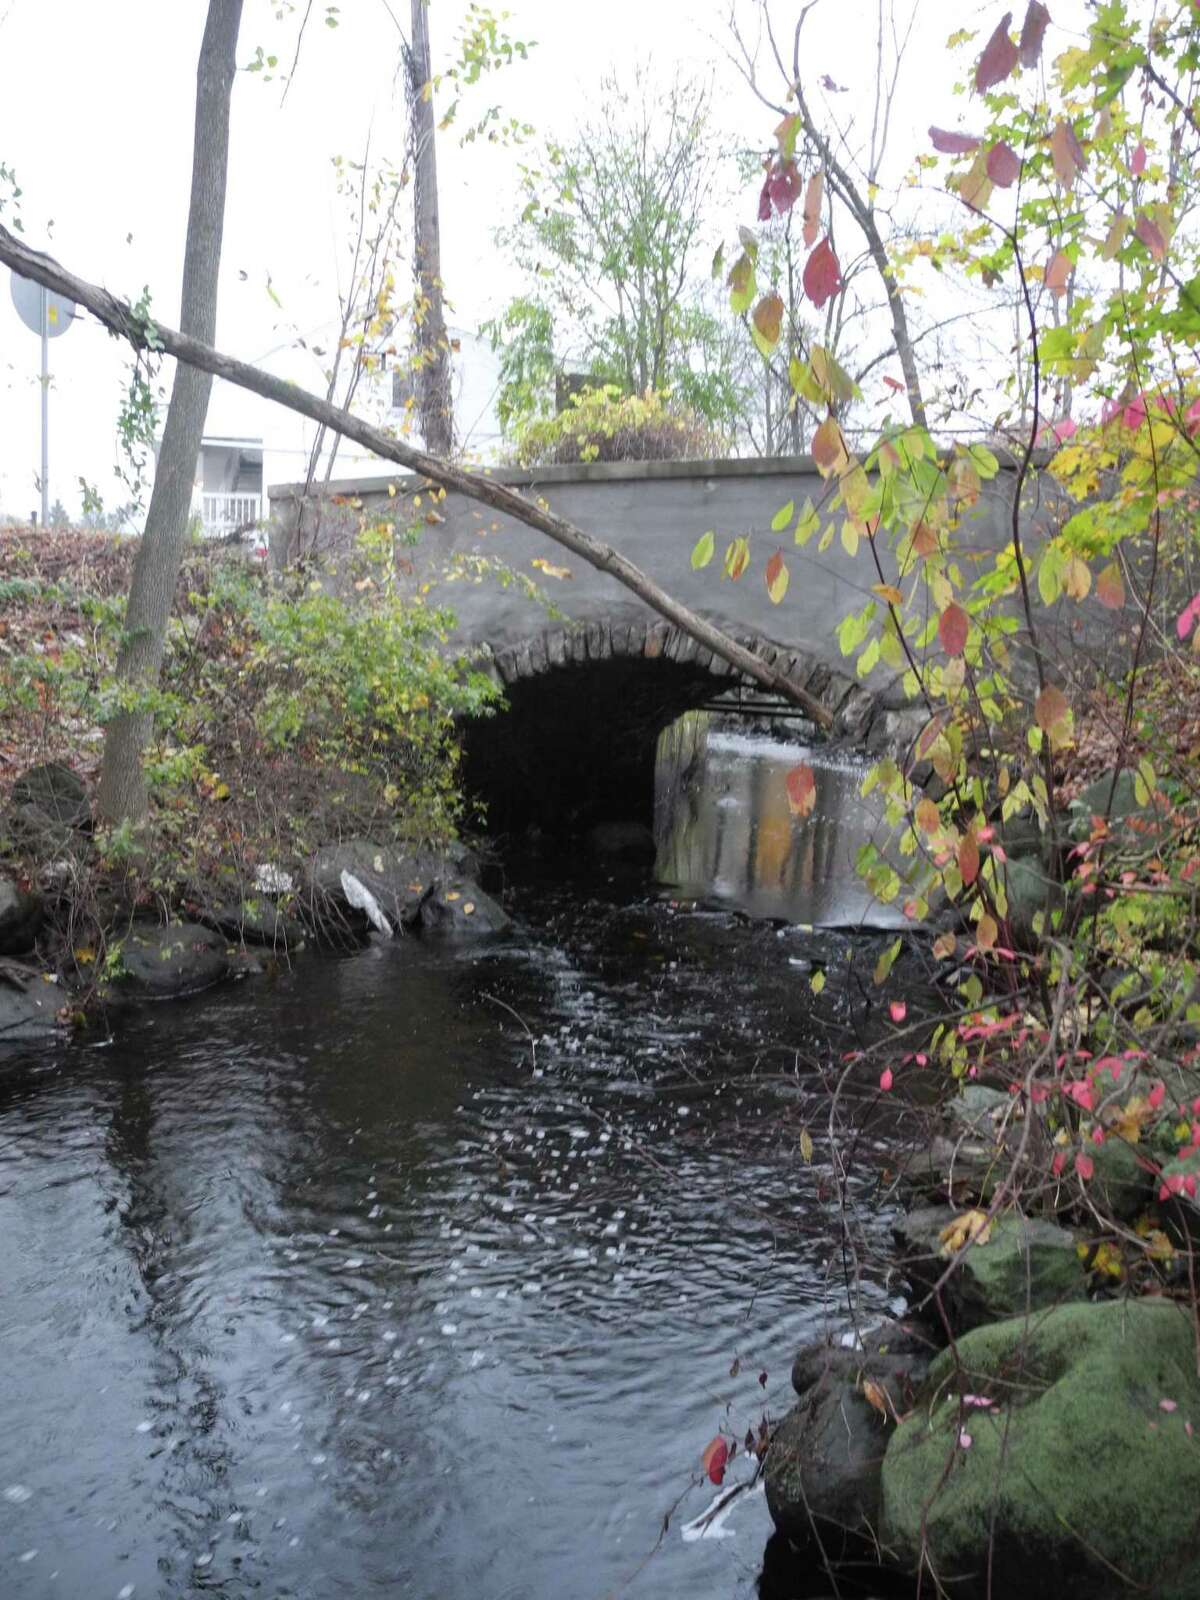 Depot Road bridge, which crosses the Norwalk River providing access to and from the Branchvillle Train Station, will soon be closed to traffic.